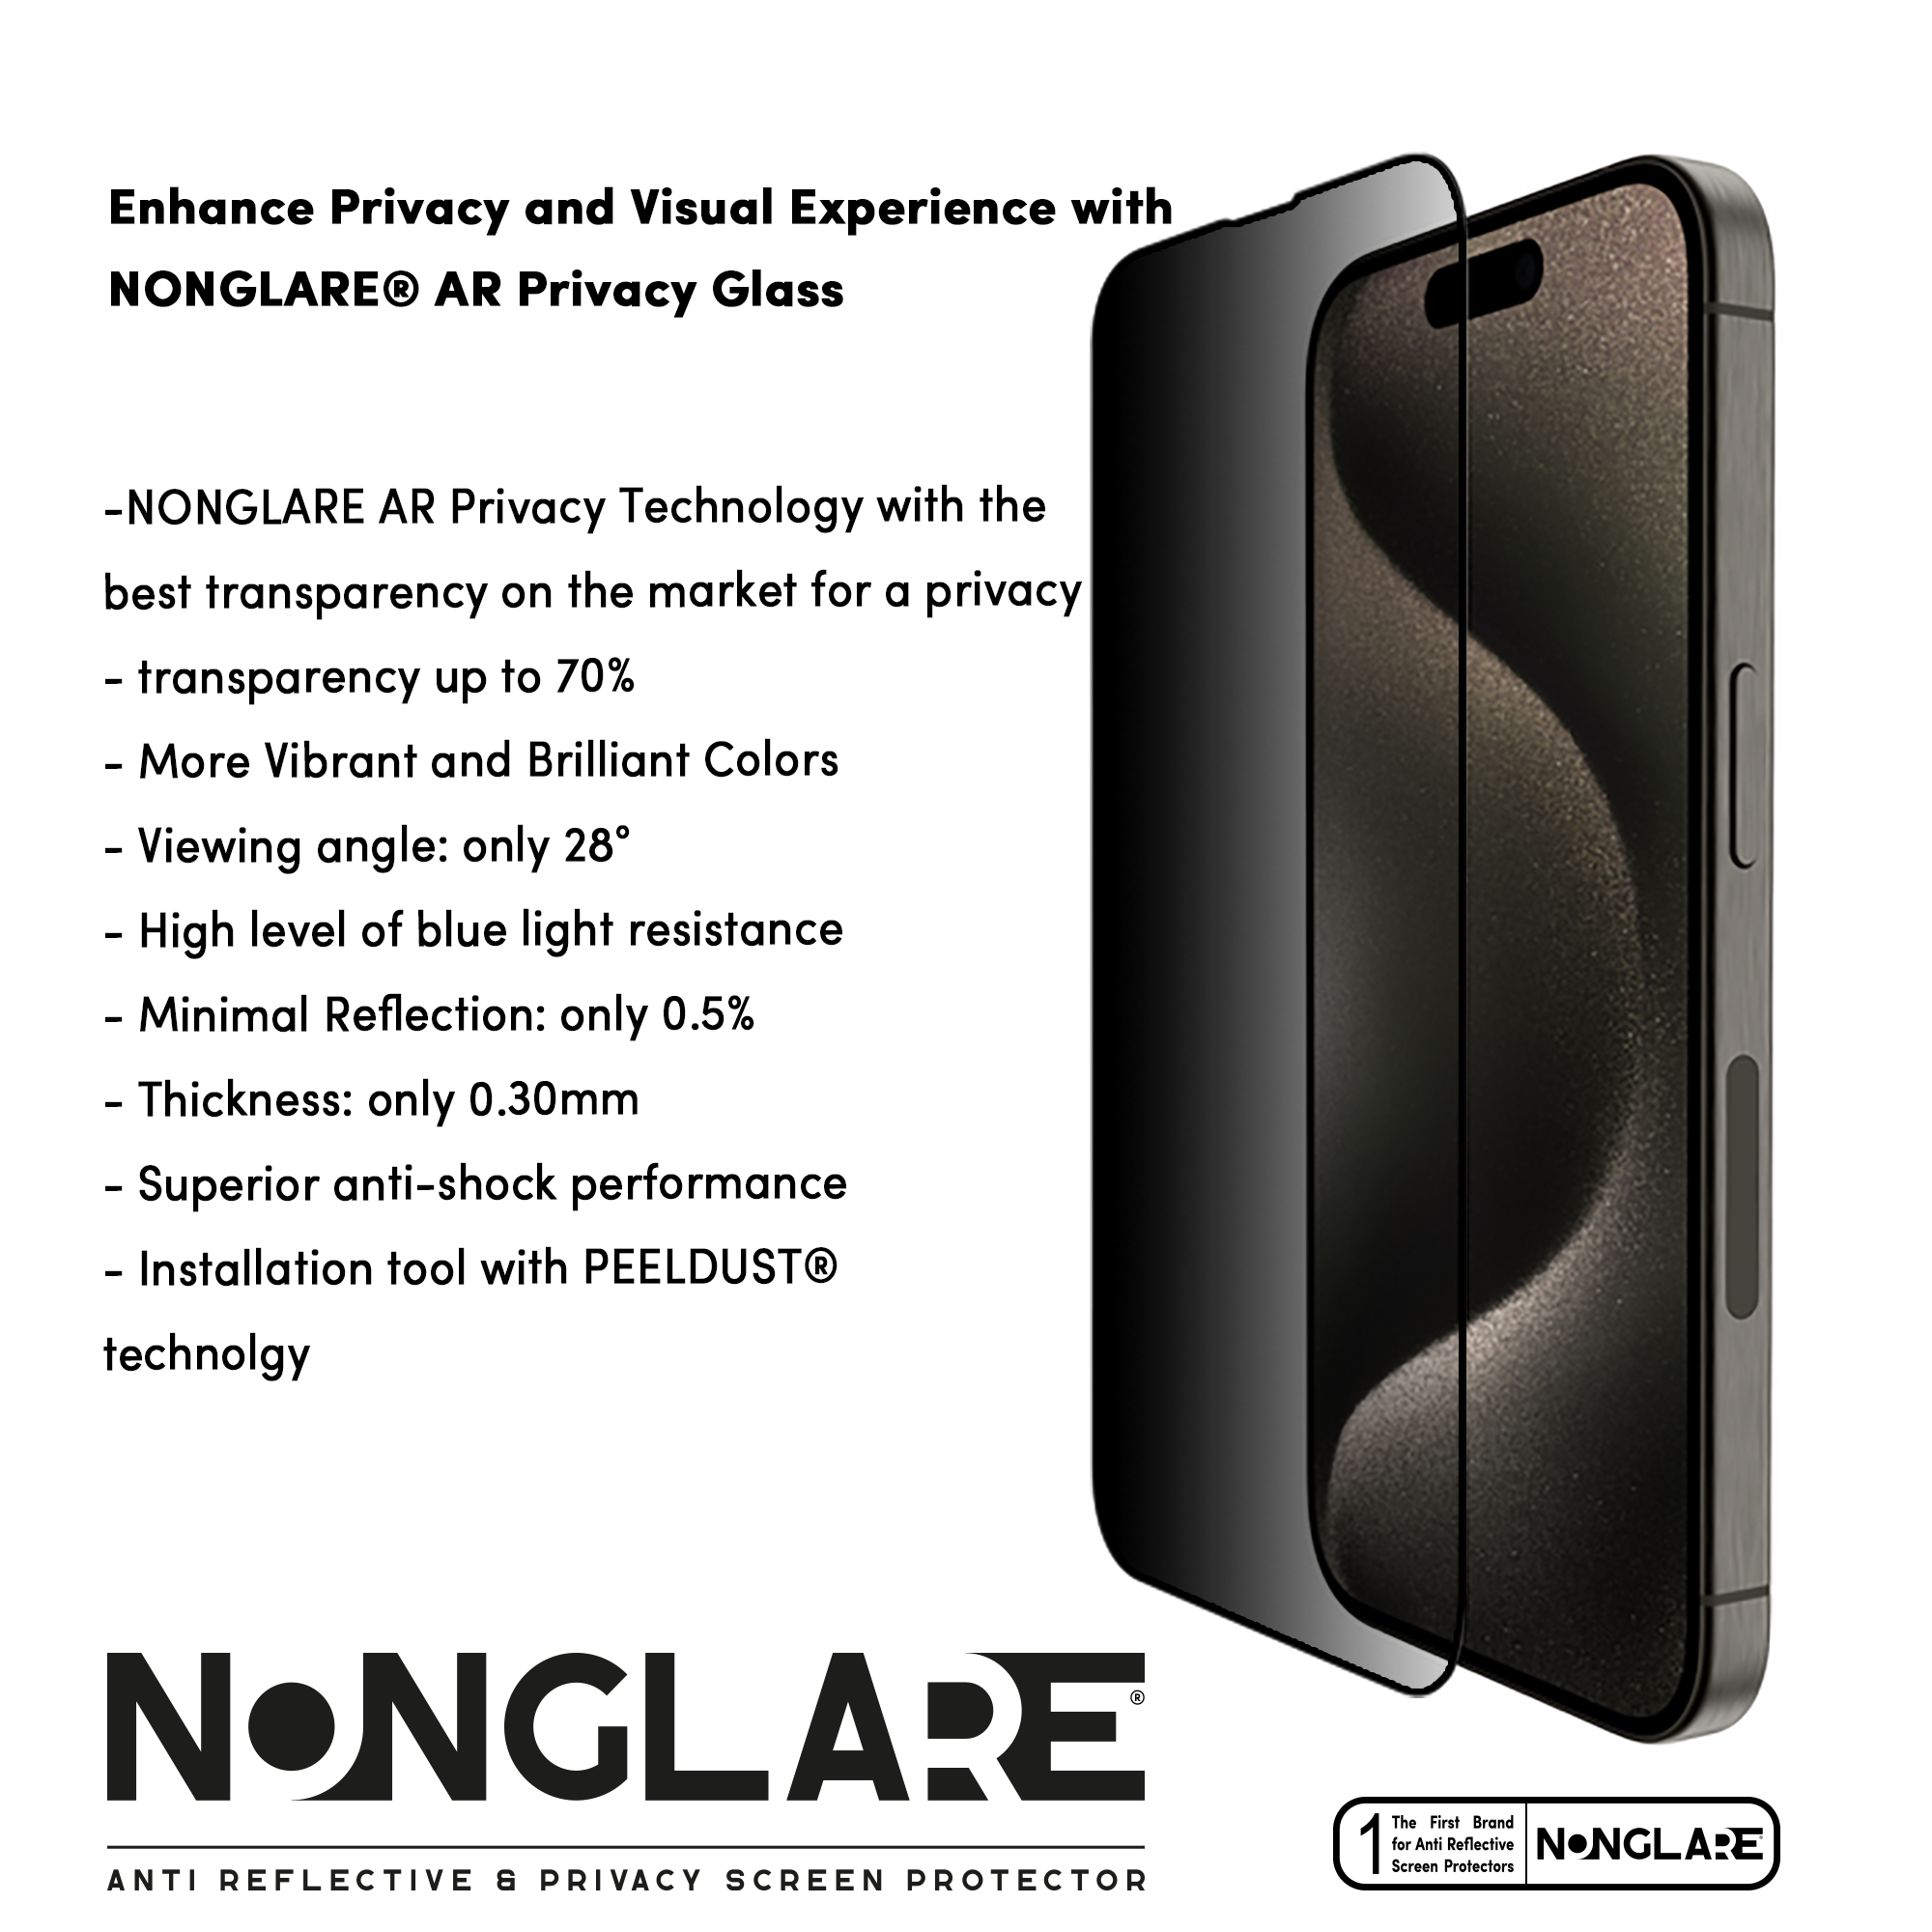 iPhone NONGLARE AR PRIVACY - Launch Edition